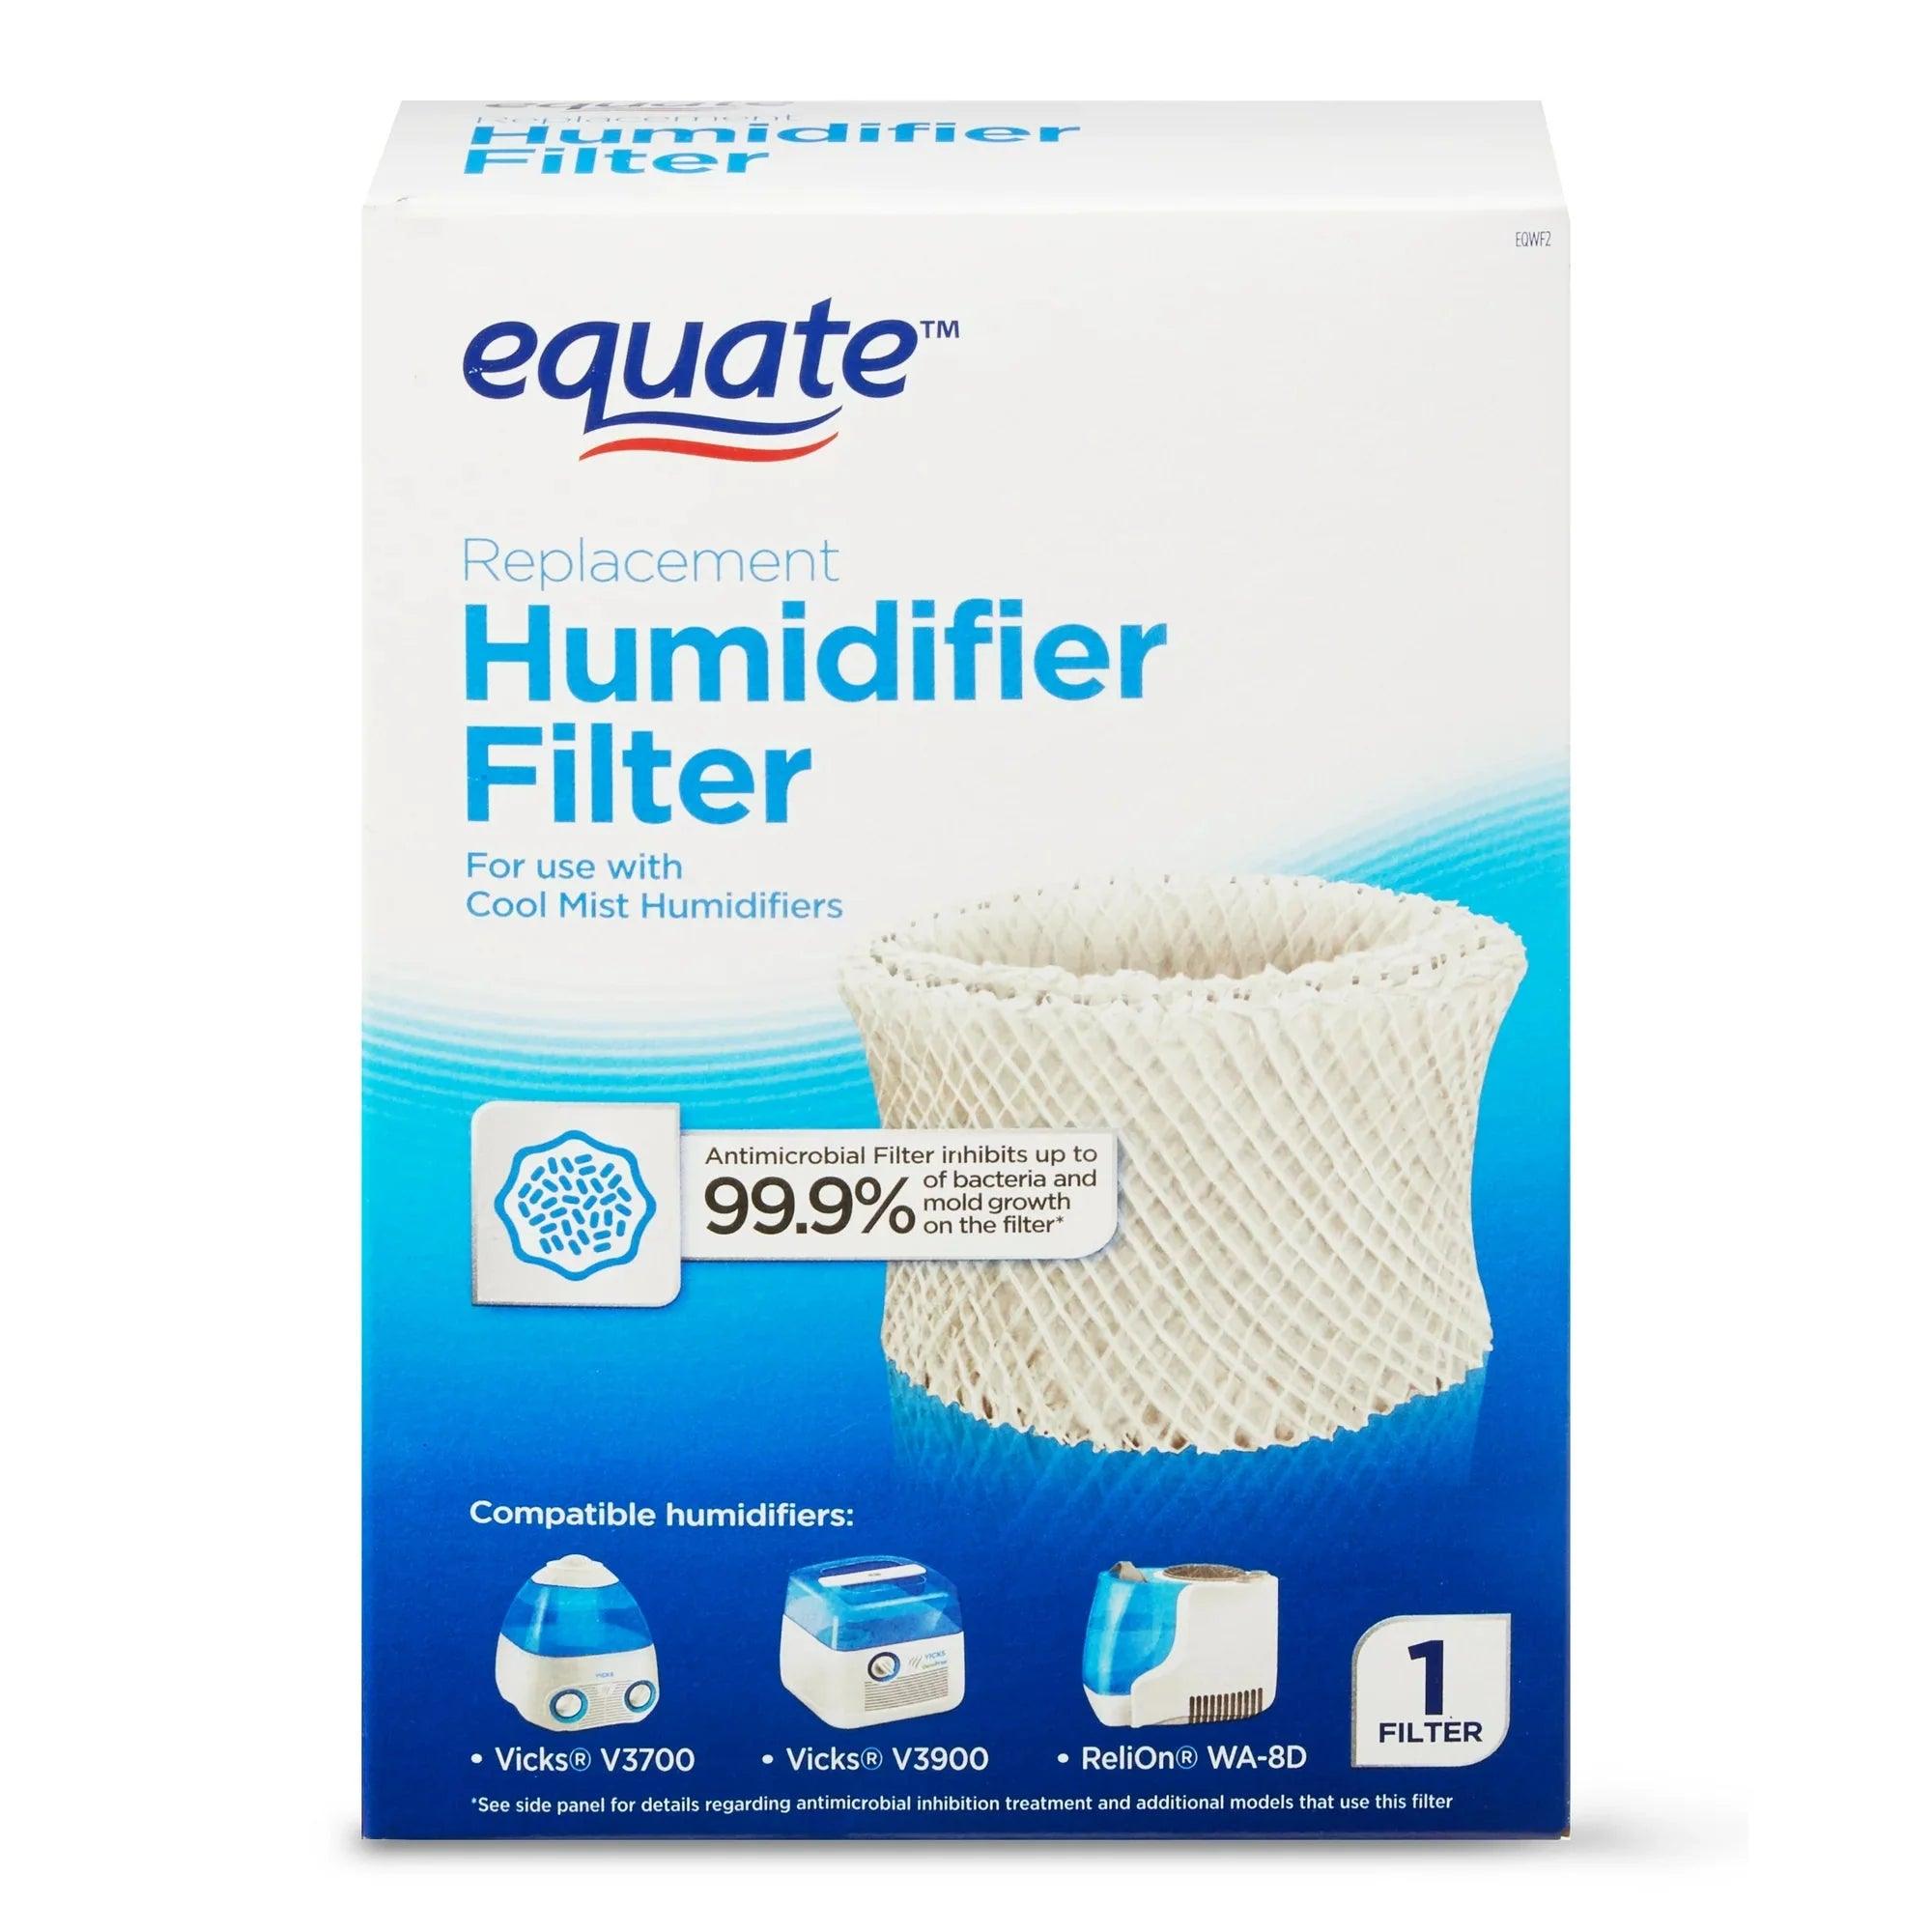 Wholesale prices with free shipping all over United States Equate Replacement Humidifier Filter - Steven Deals